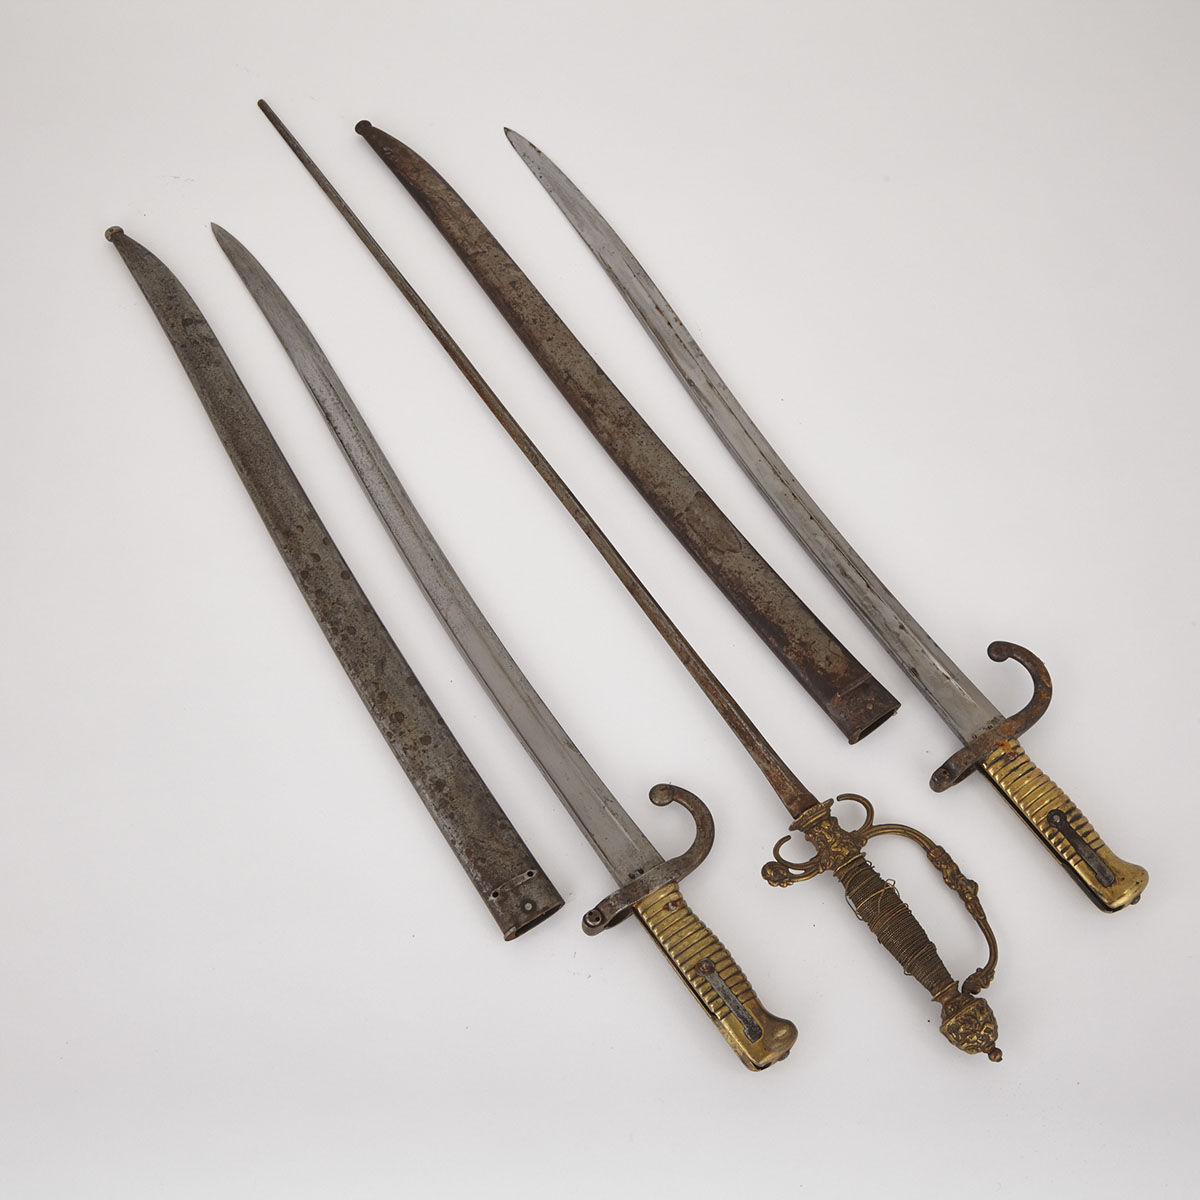 Three French Edged Weapons, 19th century